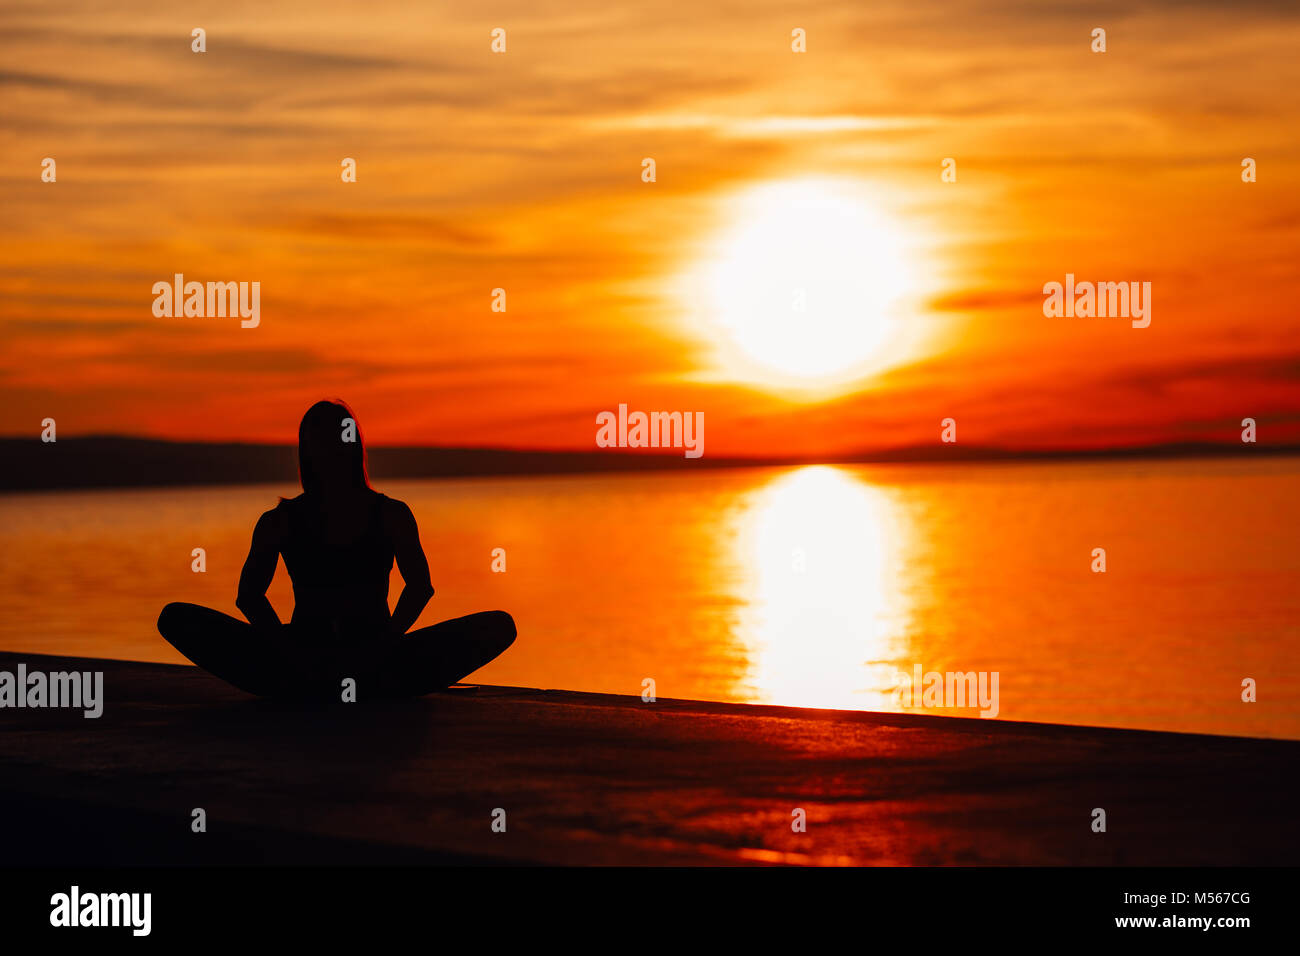 Carefree calm woman meditating in nature.Finding inner peace.Yoga practice.Spiritual healing lifestyle.Enjoying peace,anti-stress therapy,mindfulness  Stock Photo